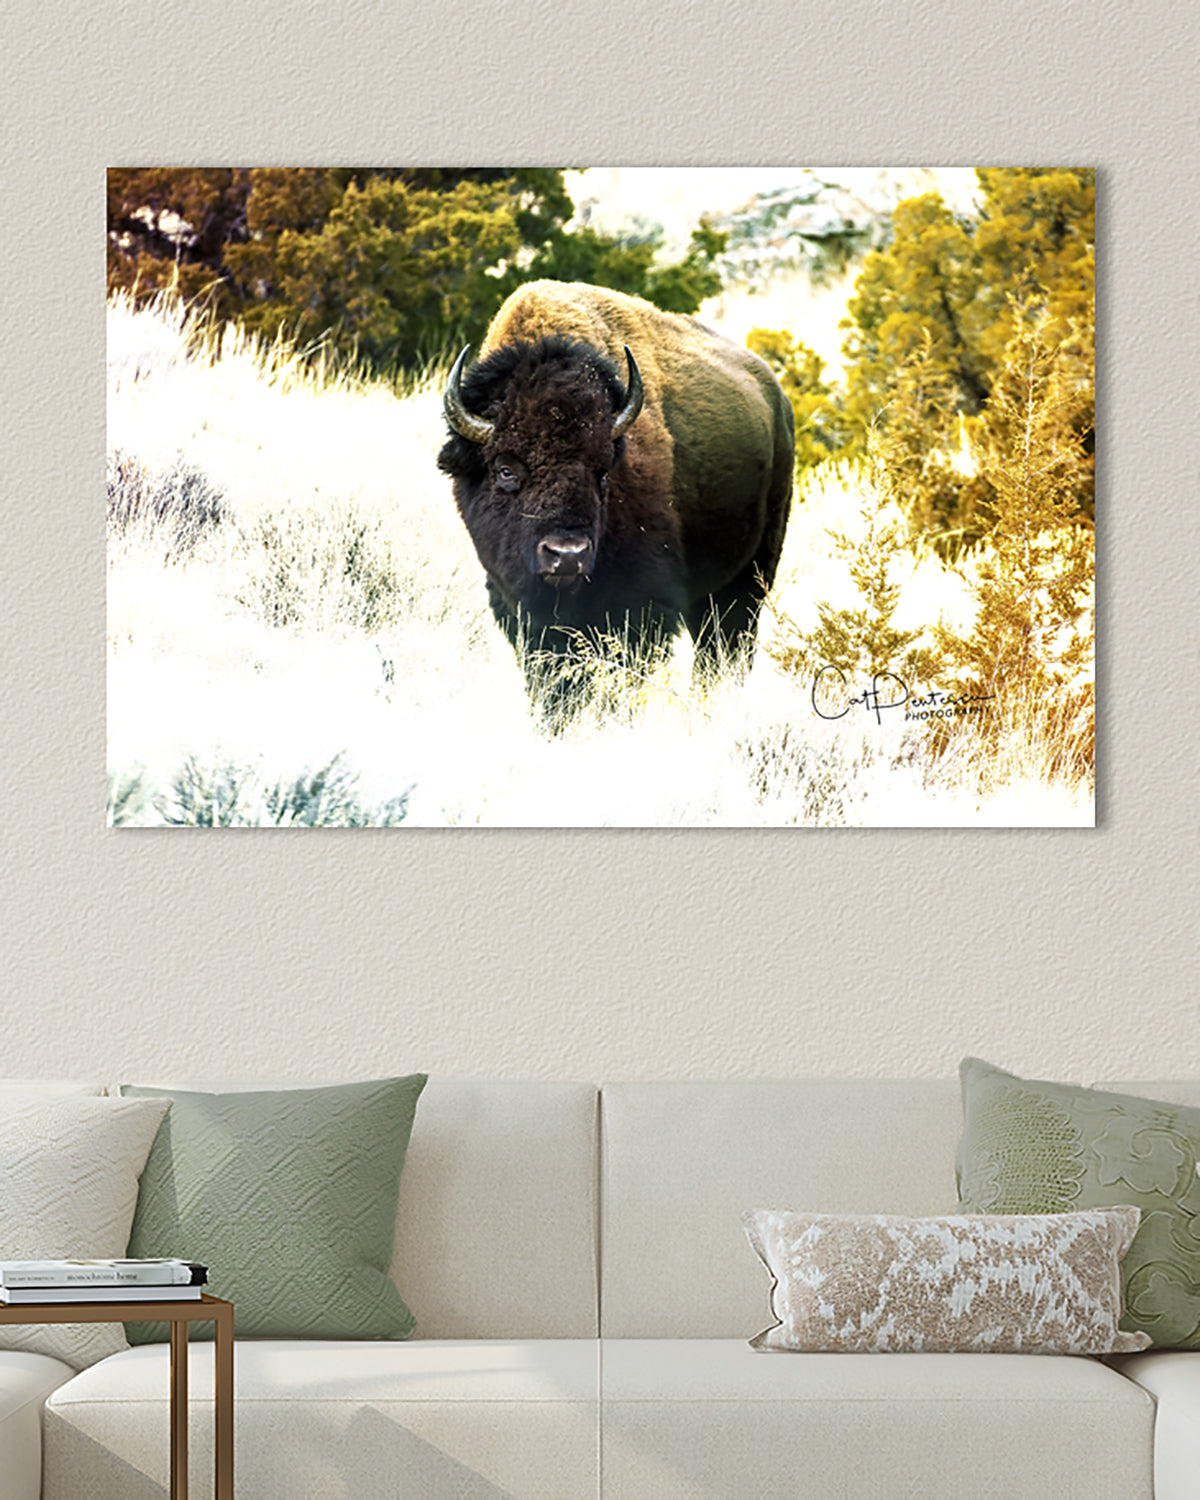 Boldly Buffalo - image of wild buffalo enhanced to create colorful work of art. shown on wall over couch. Wildlife Bison Wall decor. Cat Pentescu Photography